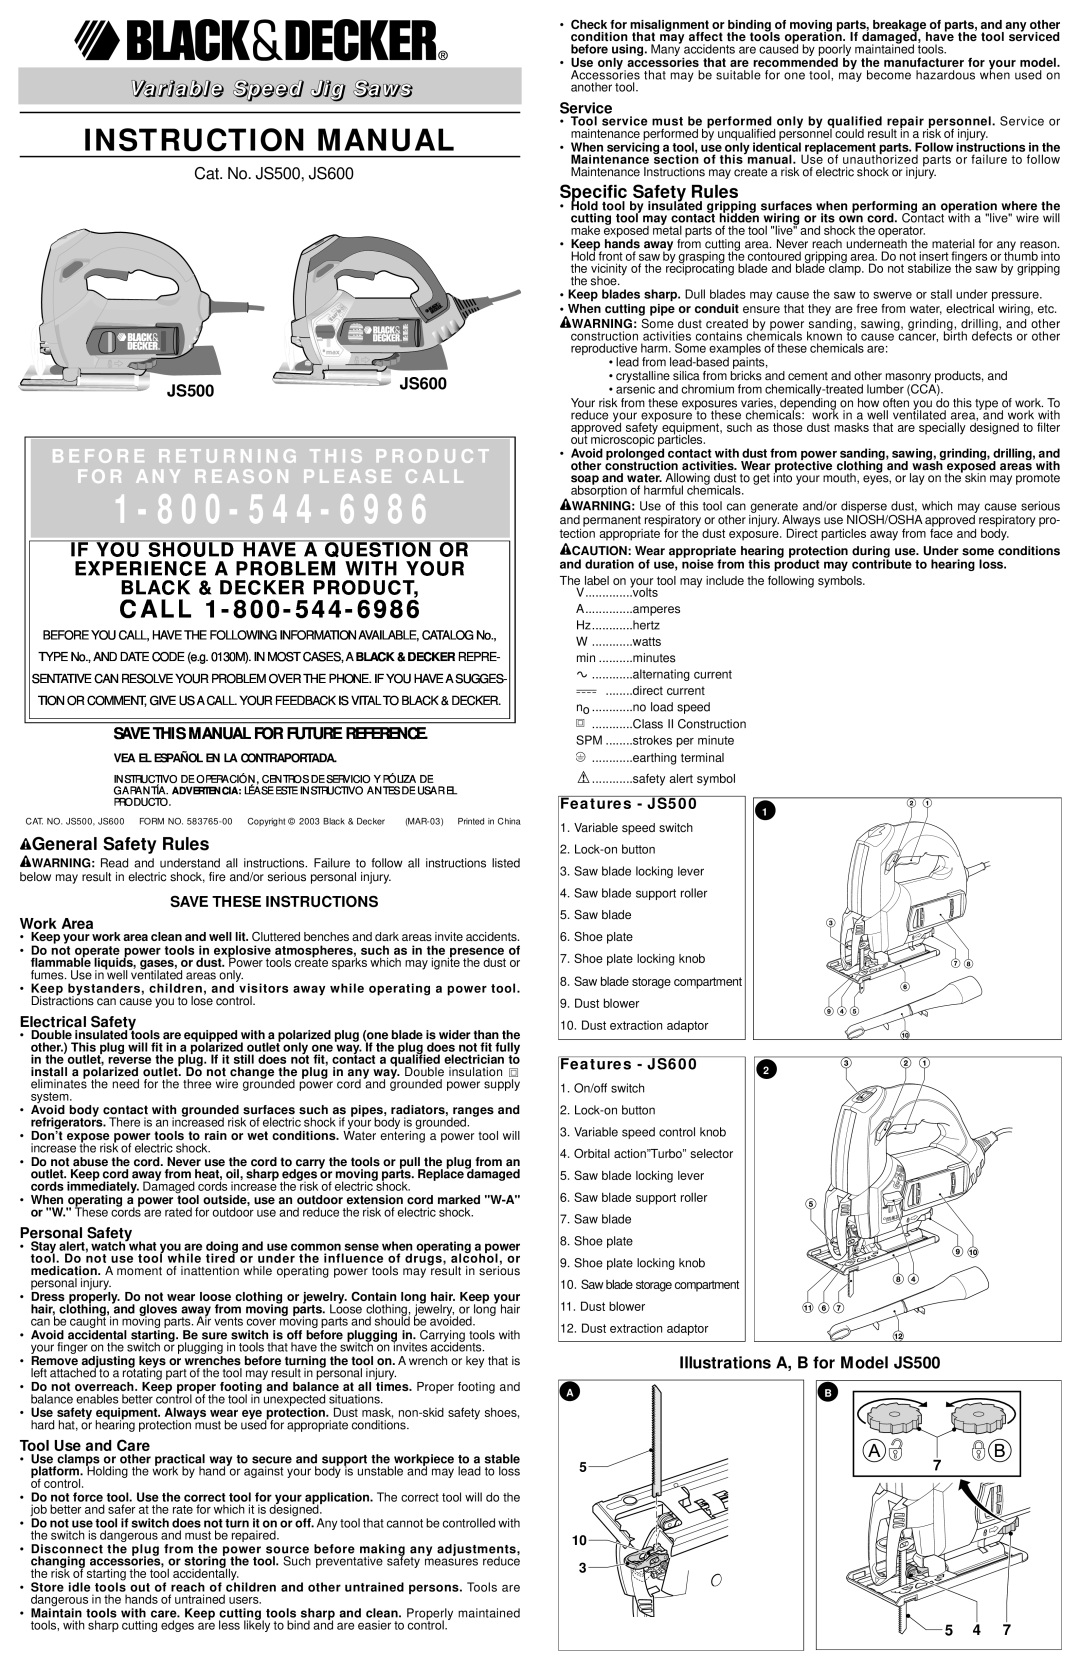 Black & Decker 583765-00 instruction manual JS500, Save This Manual For Future Reference, JS600, Electrical Safety 